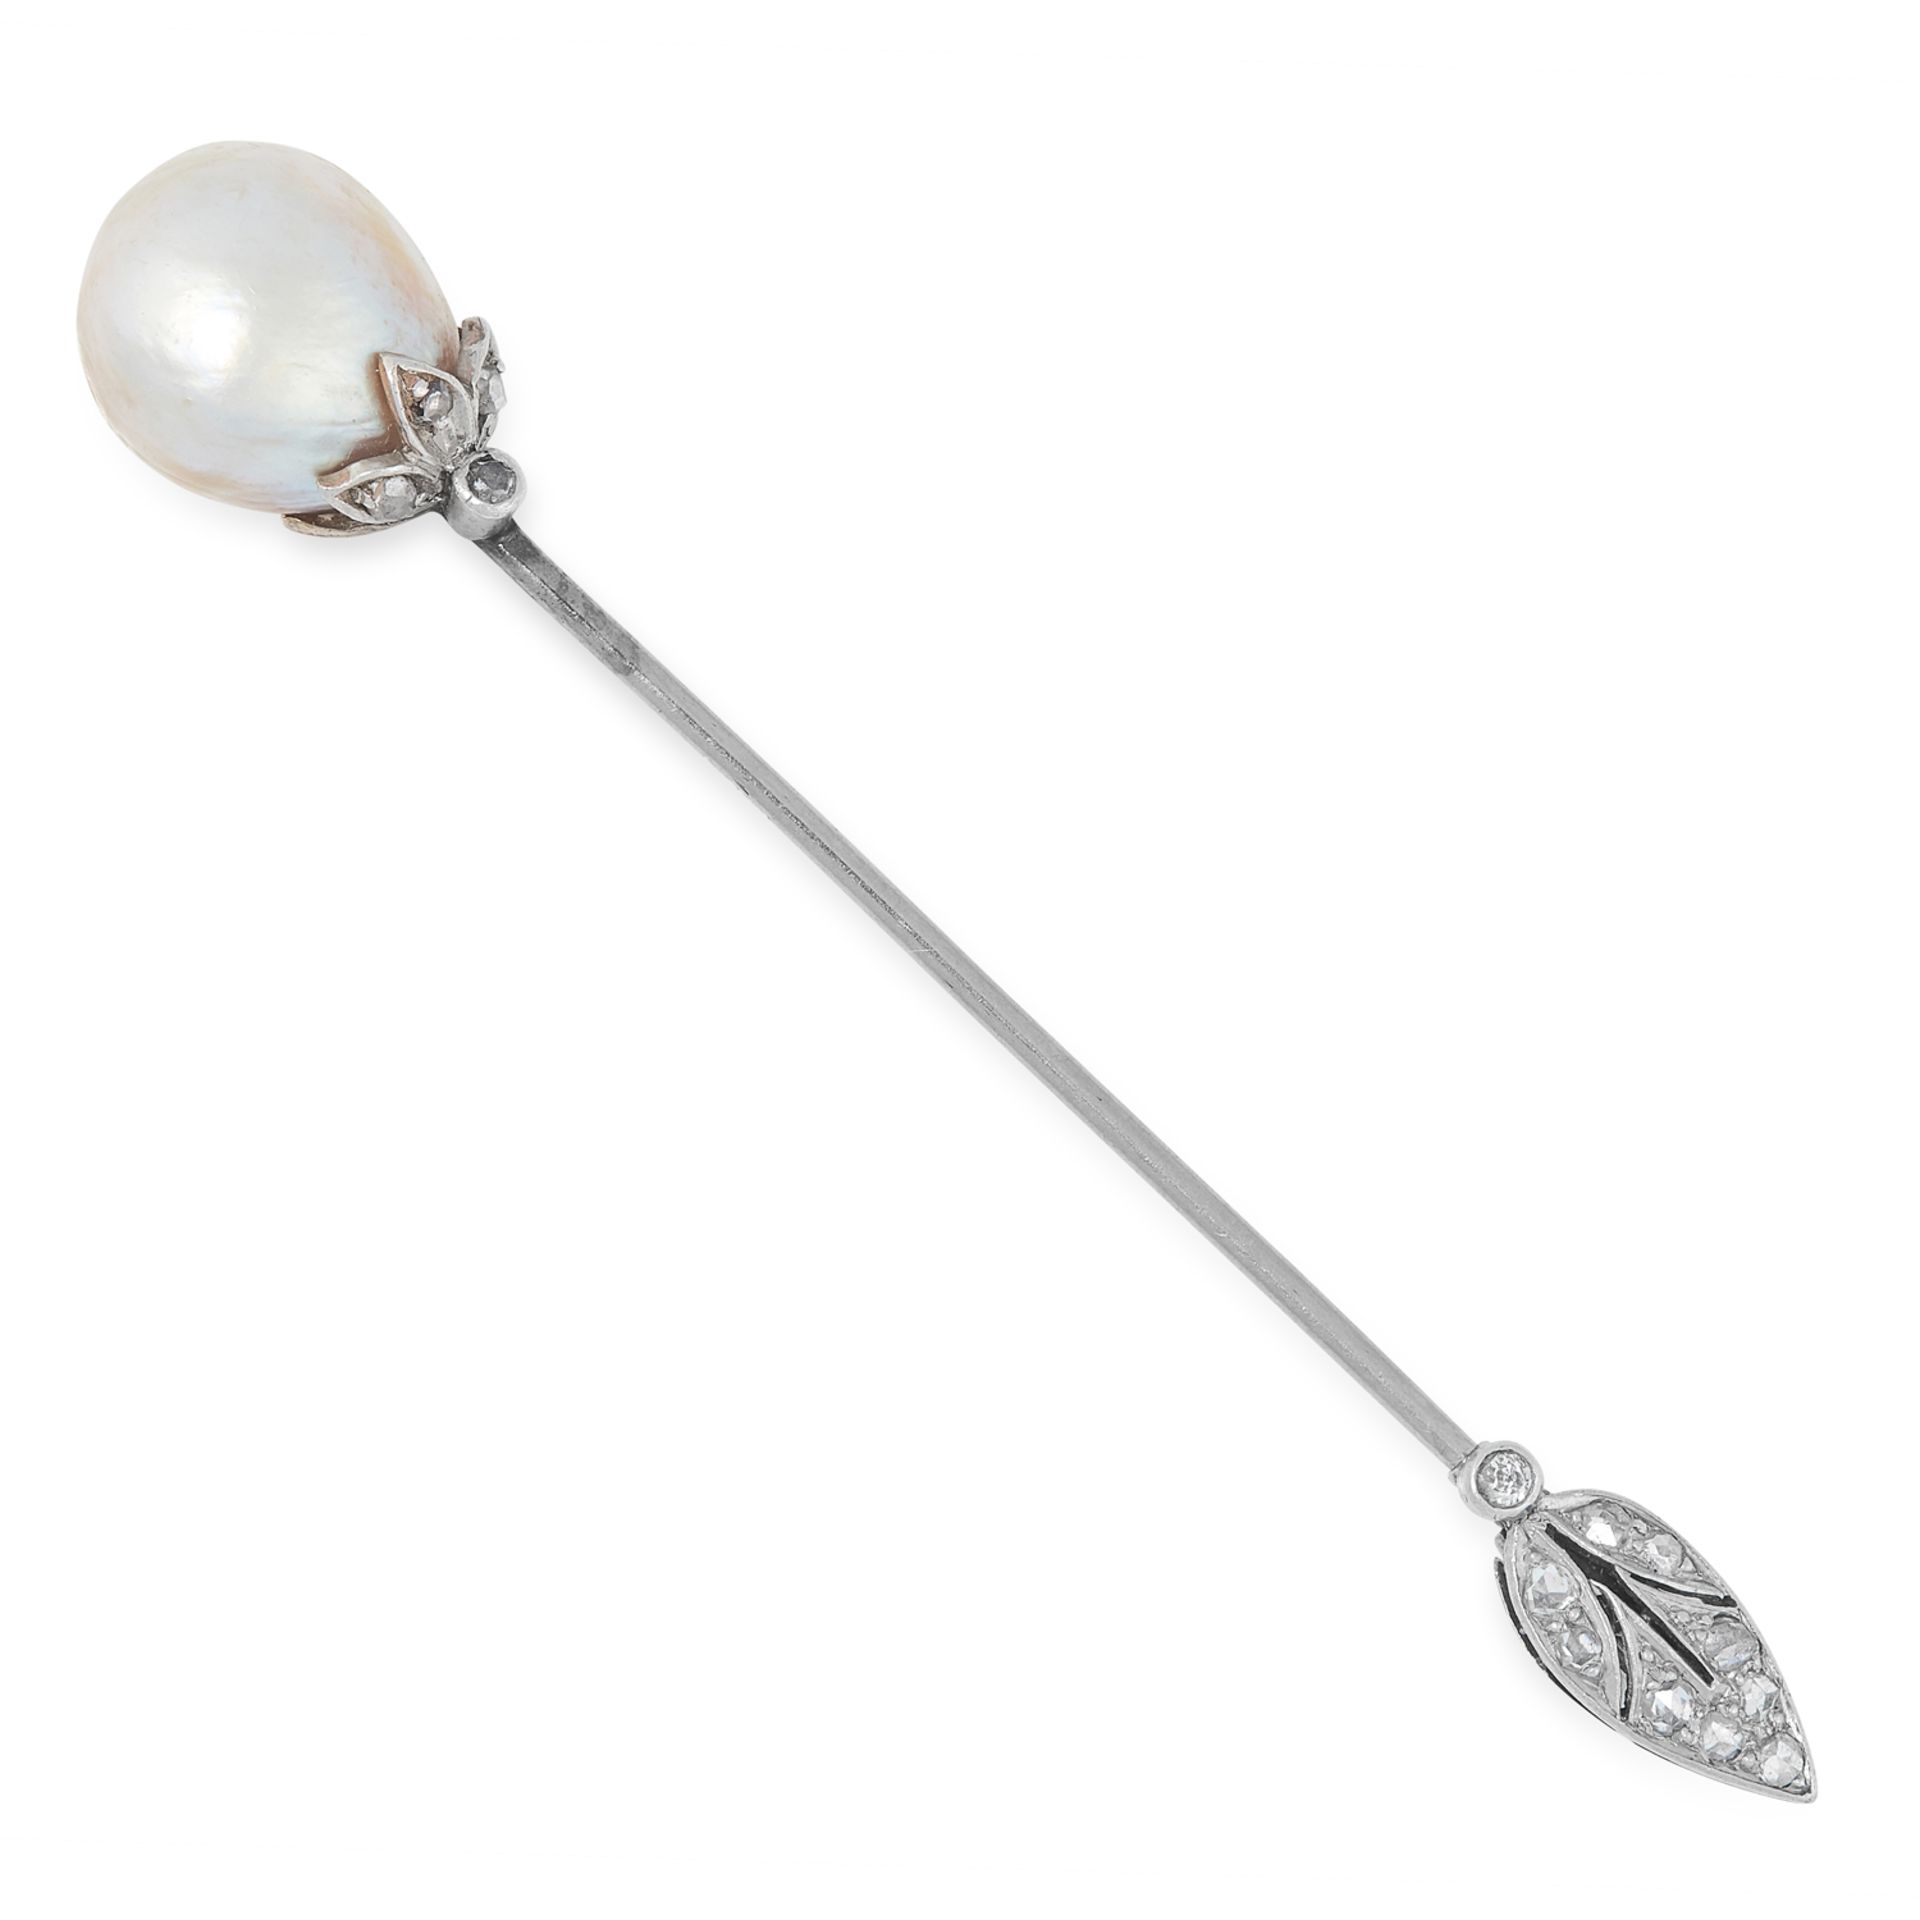 AN ANTIQUE NATURAL SALTWATER PEARL AND DIAMOND JABOT PIN in platinum and gold, set at one end with a